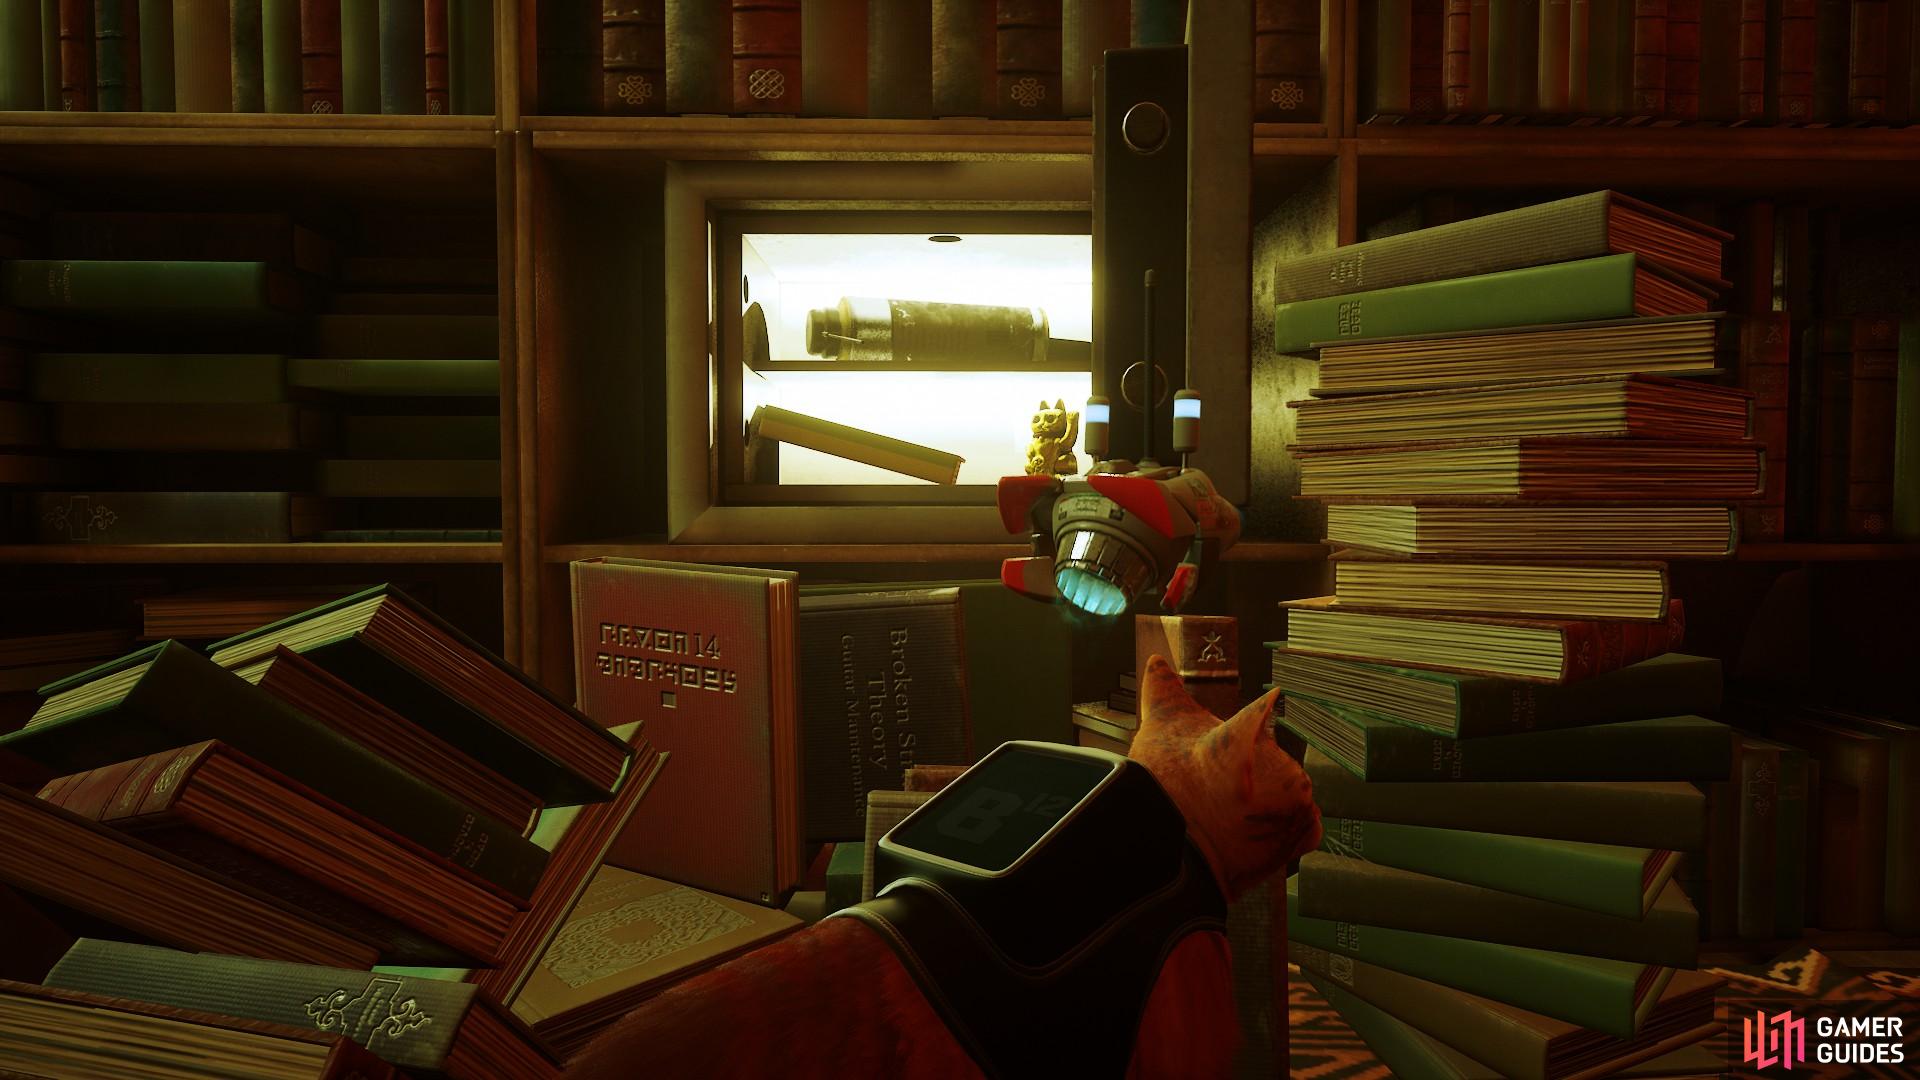 Doc's notebook location is inside this safe, which is revealed by getting a key from the office and tipping over a pile of books.